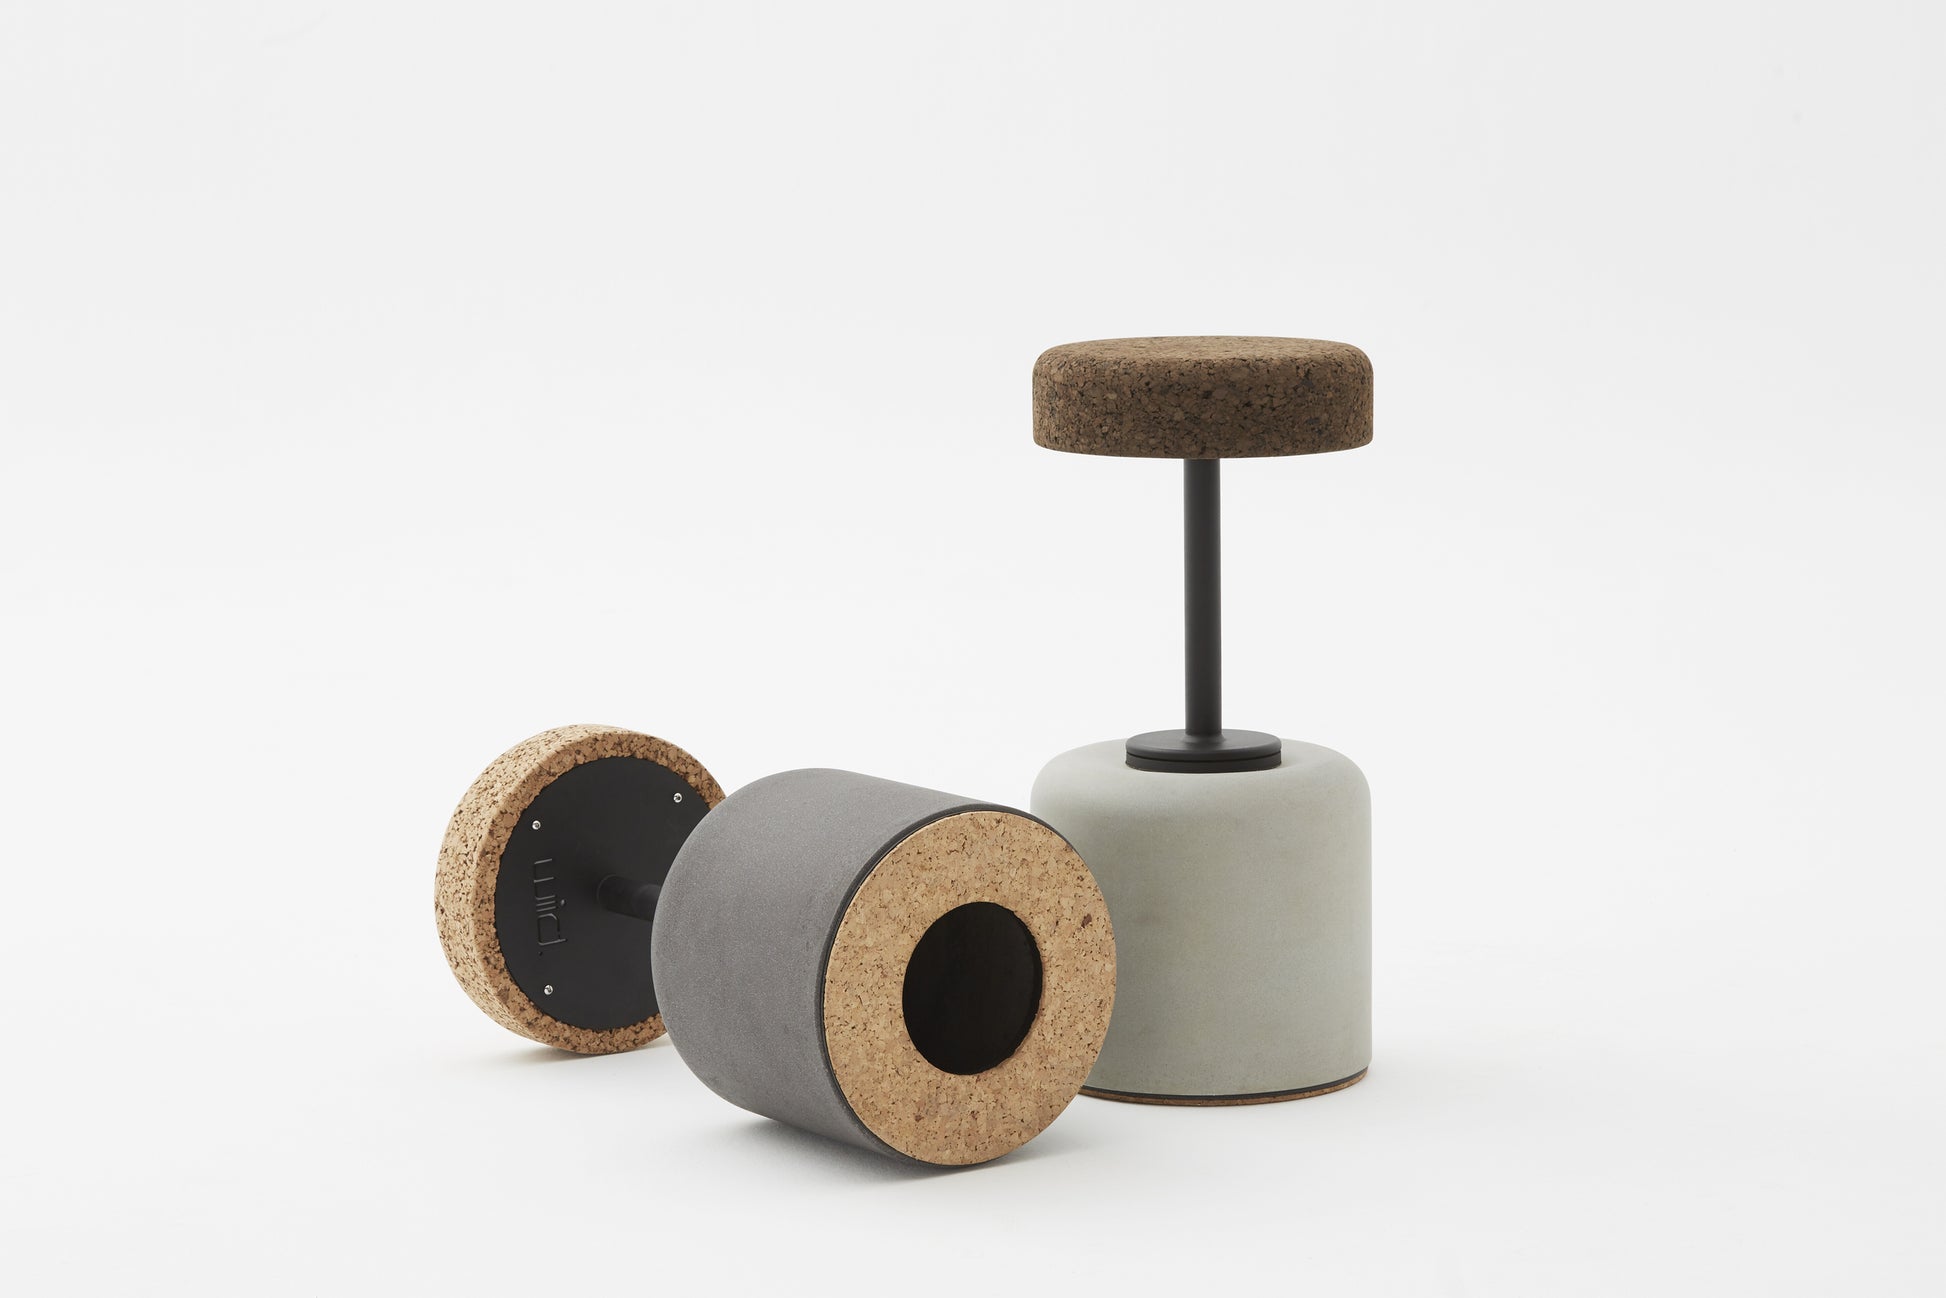 Close-up view of the bottom of Kanju's Wiid Swivel Cork and Concrete Barstool, highlighting the sturdy construction and innovative design. This image showcases the unique combination of natural cork and solid concrete, emphasizing the barstool's balance of eco-friendly materials with functional, contemporary style. The swivel mechanism is subtly integrated, offering both comfort and versatility in upscale bar settings.